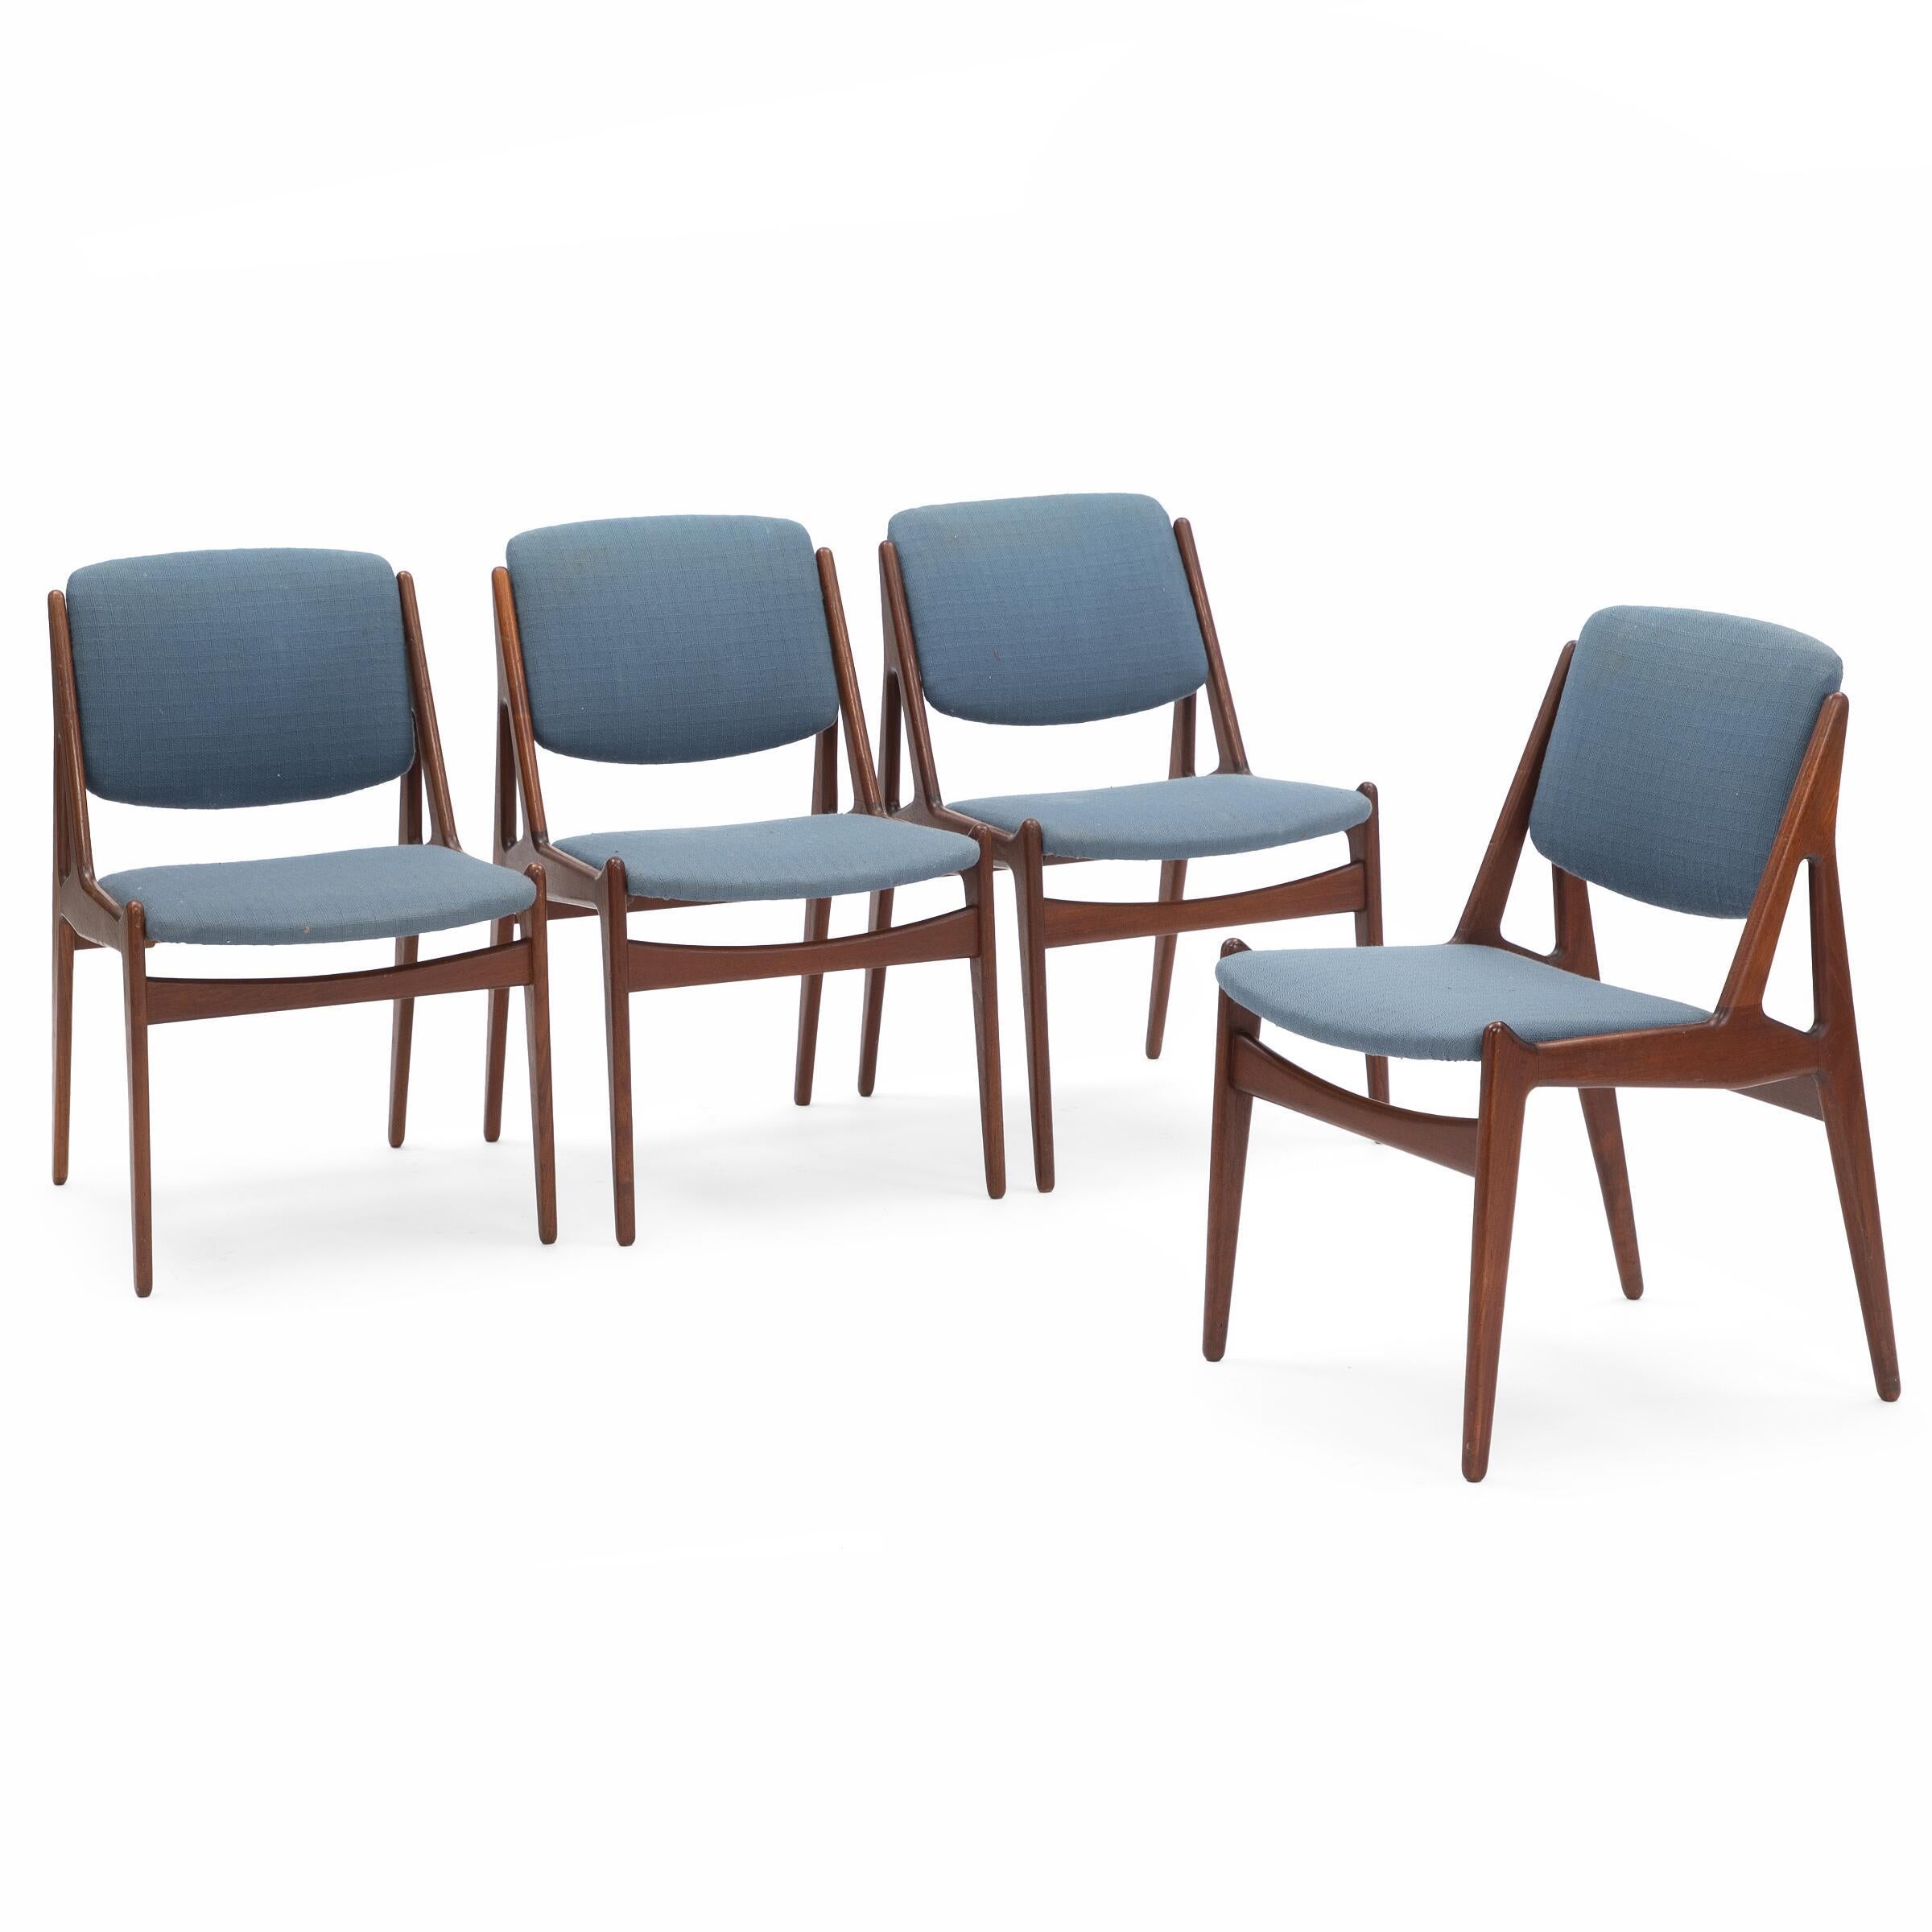 4x Danish Teak Dining Chairs by Arne Vodder, 1950s In Good Condition For Sale In St-Brais, JU